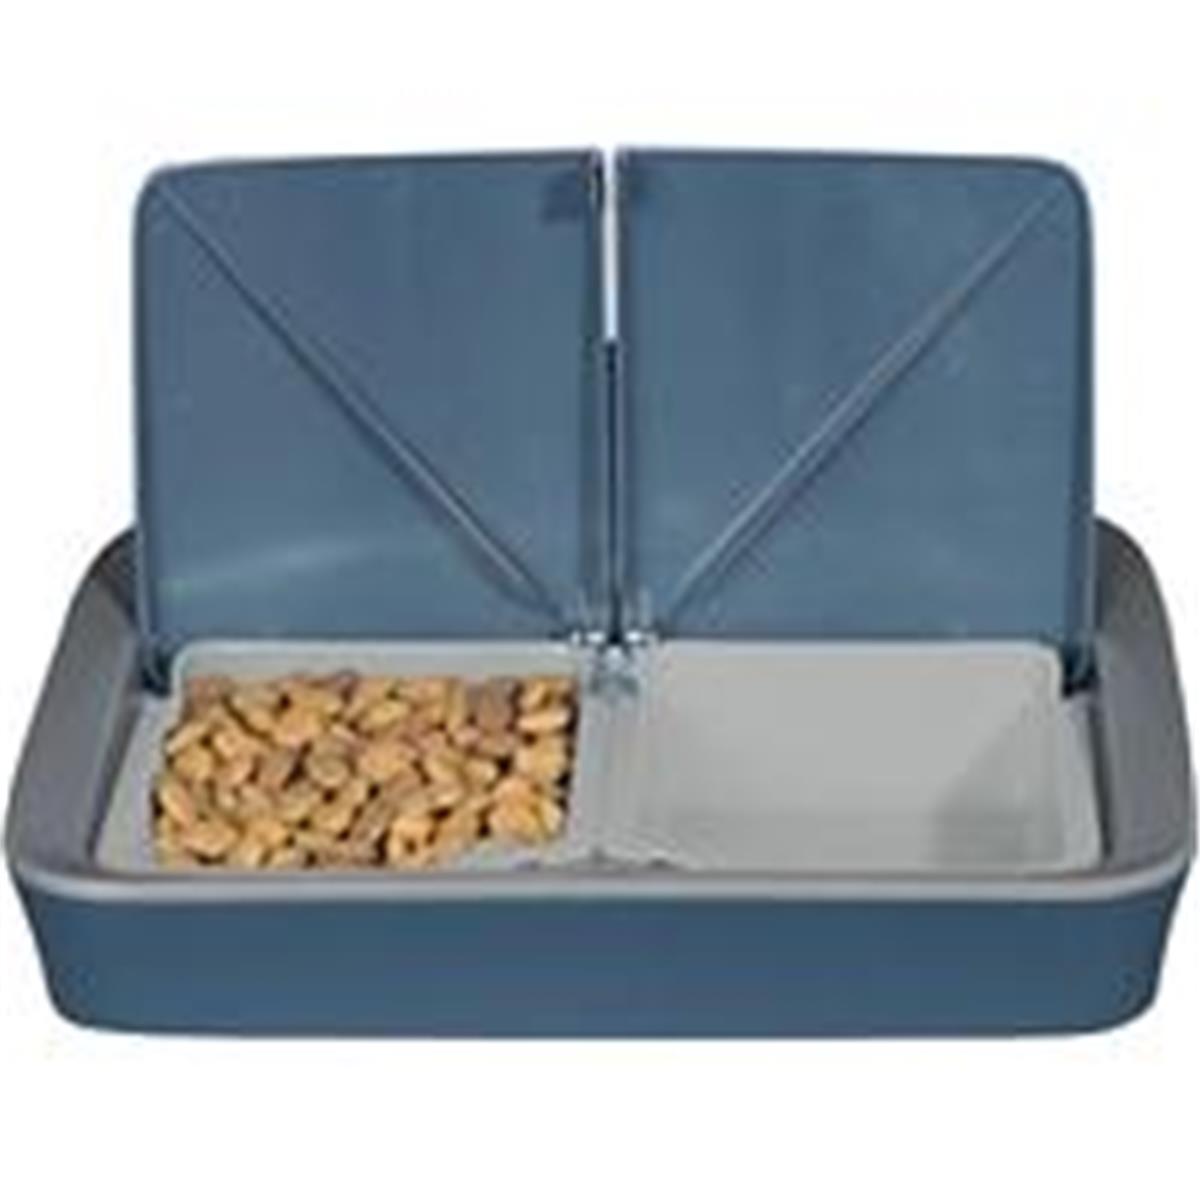 Petsafe 536289 Digital Two Meal Pet Feeder Battery Operated, Navy